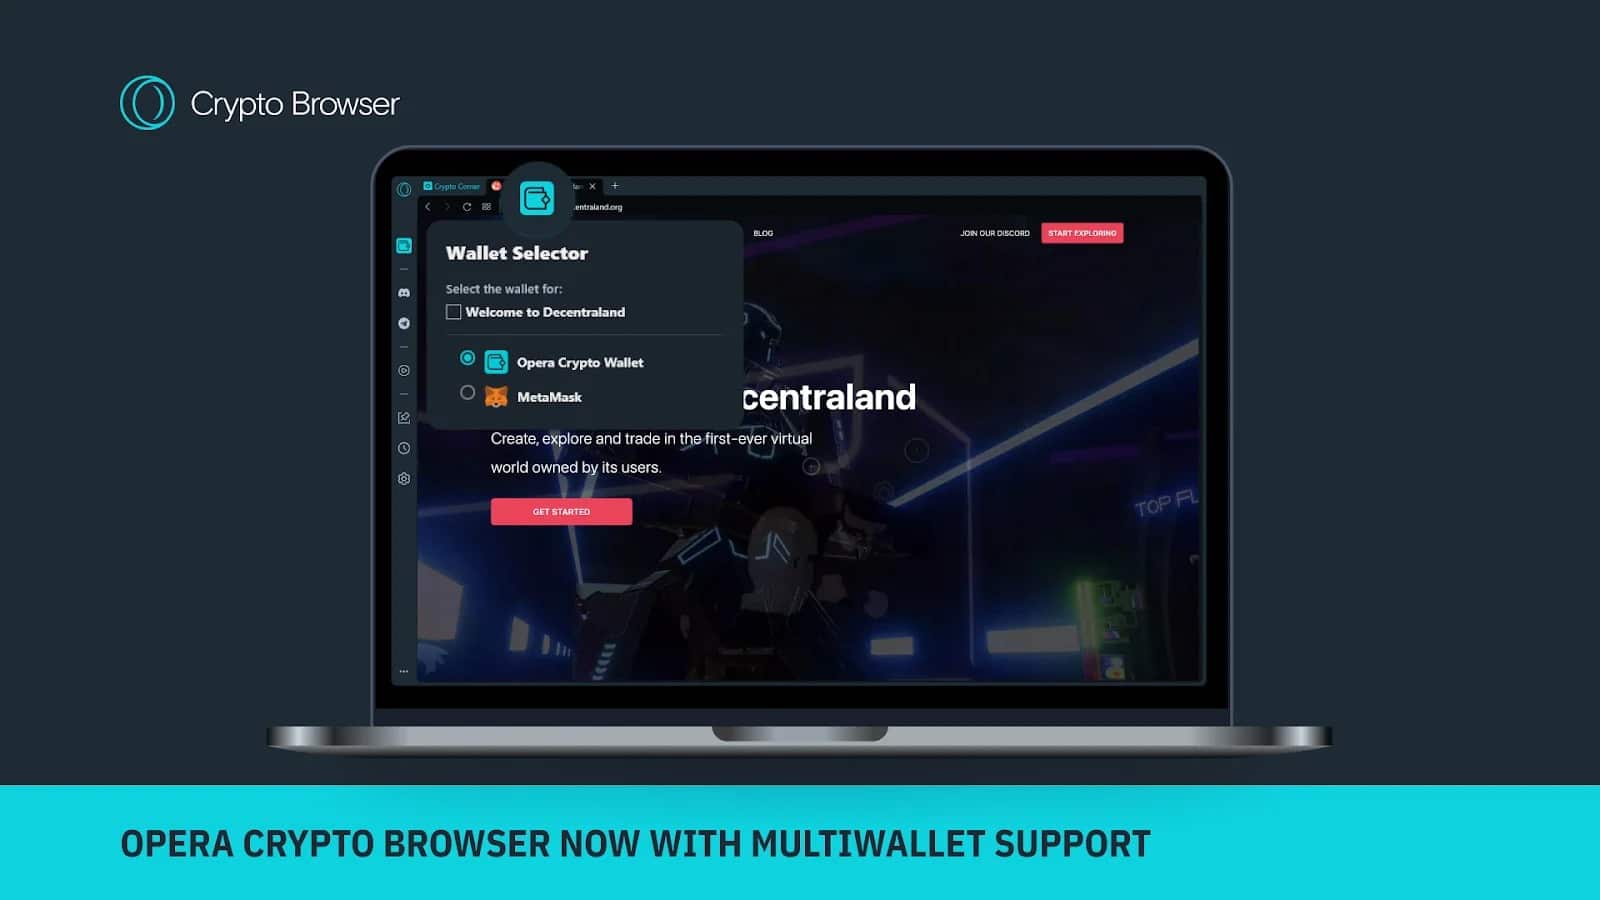 Wallet Selector preview in Opera's Crypto Browser